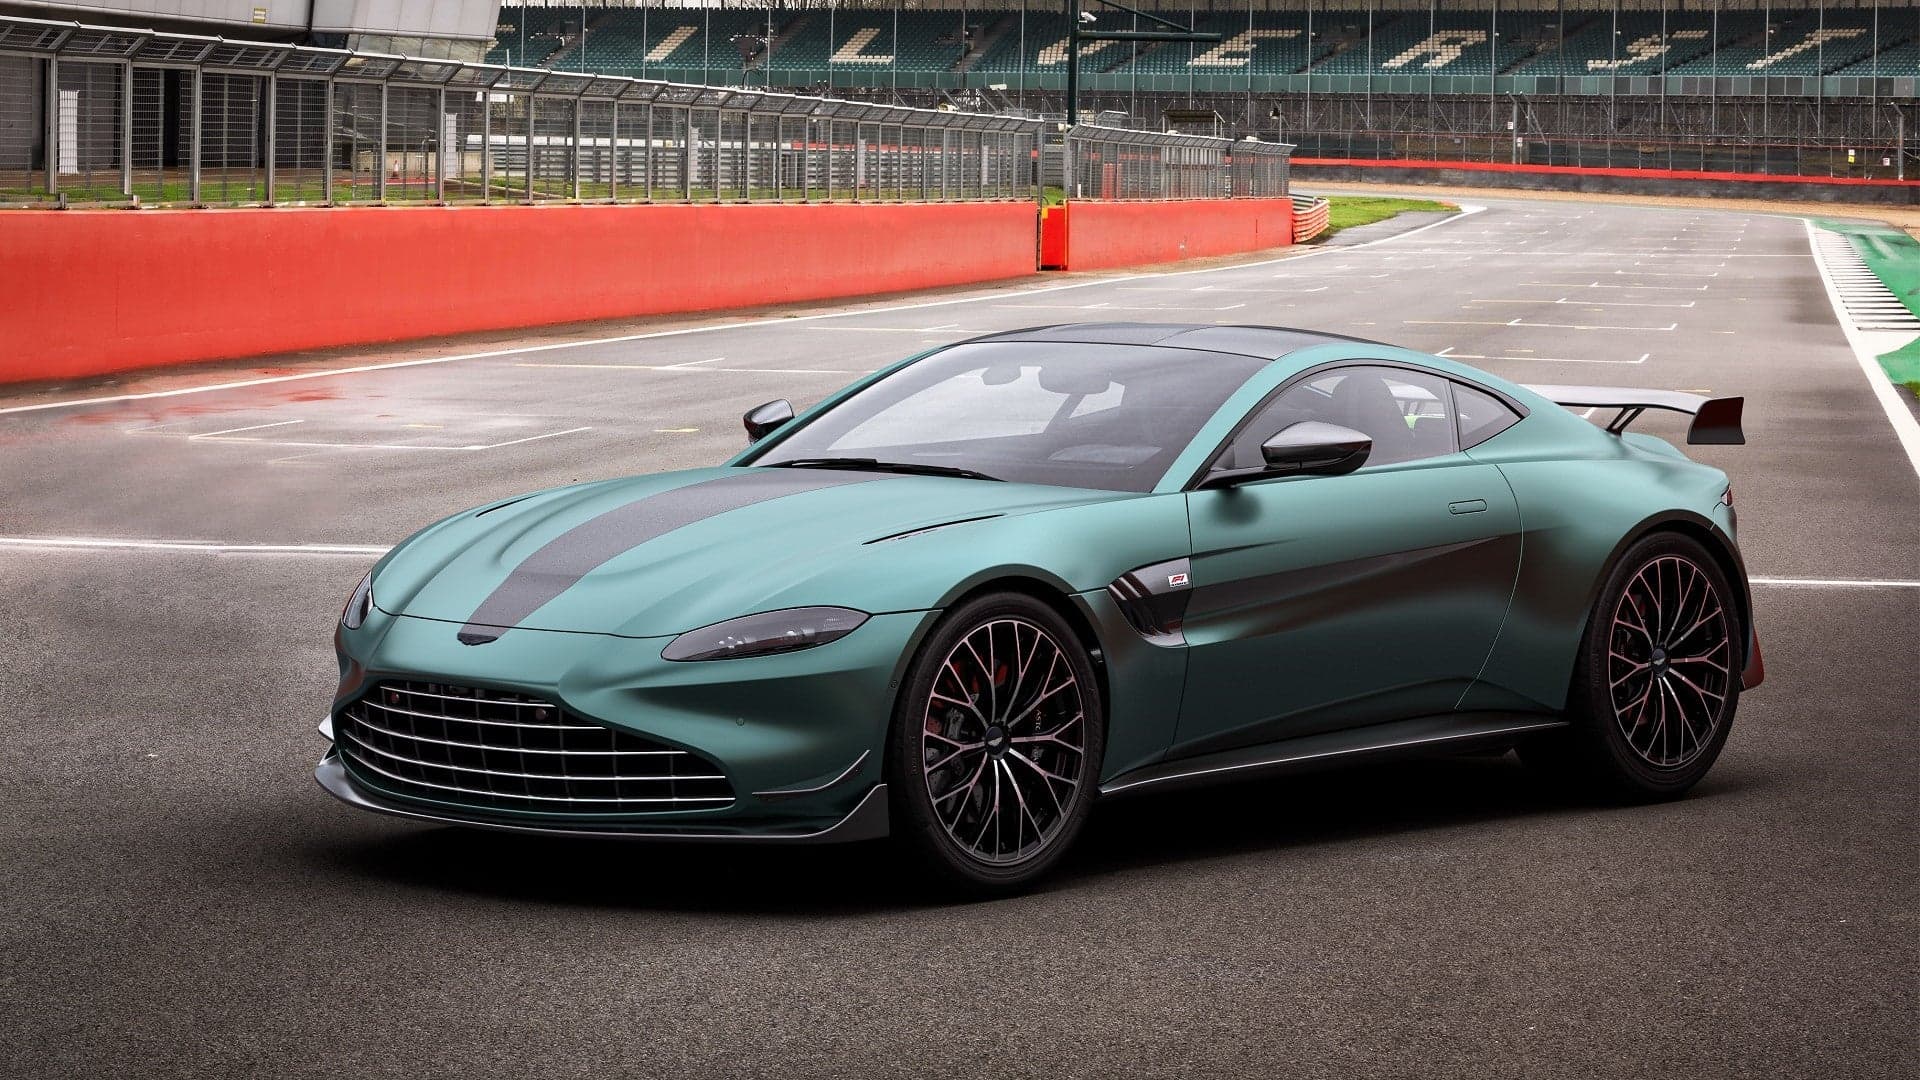 The Aston Martin Vantage F1 Edition Is a Formula One Safety Car For the Road